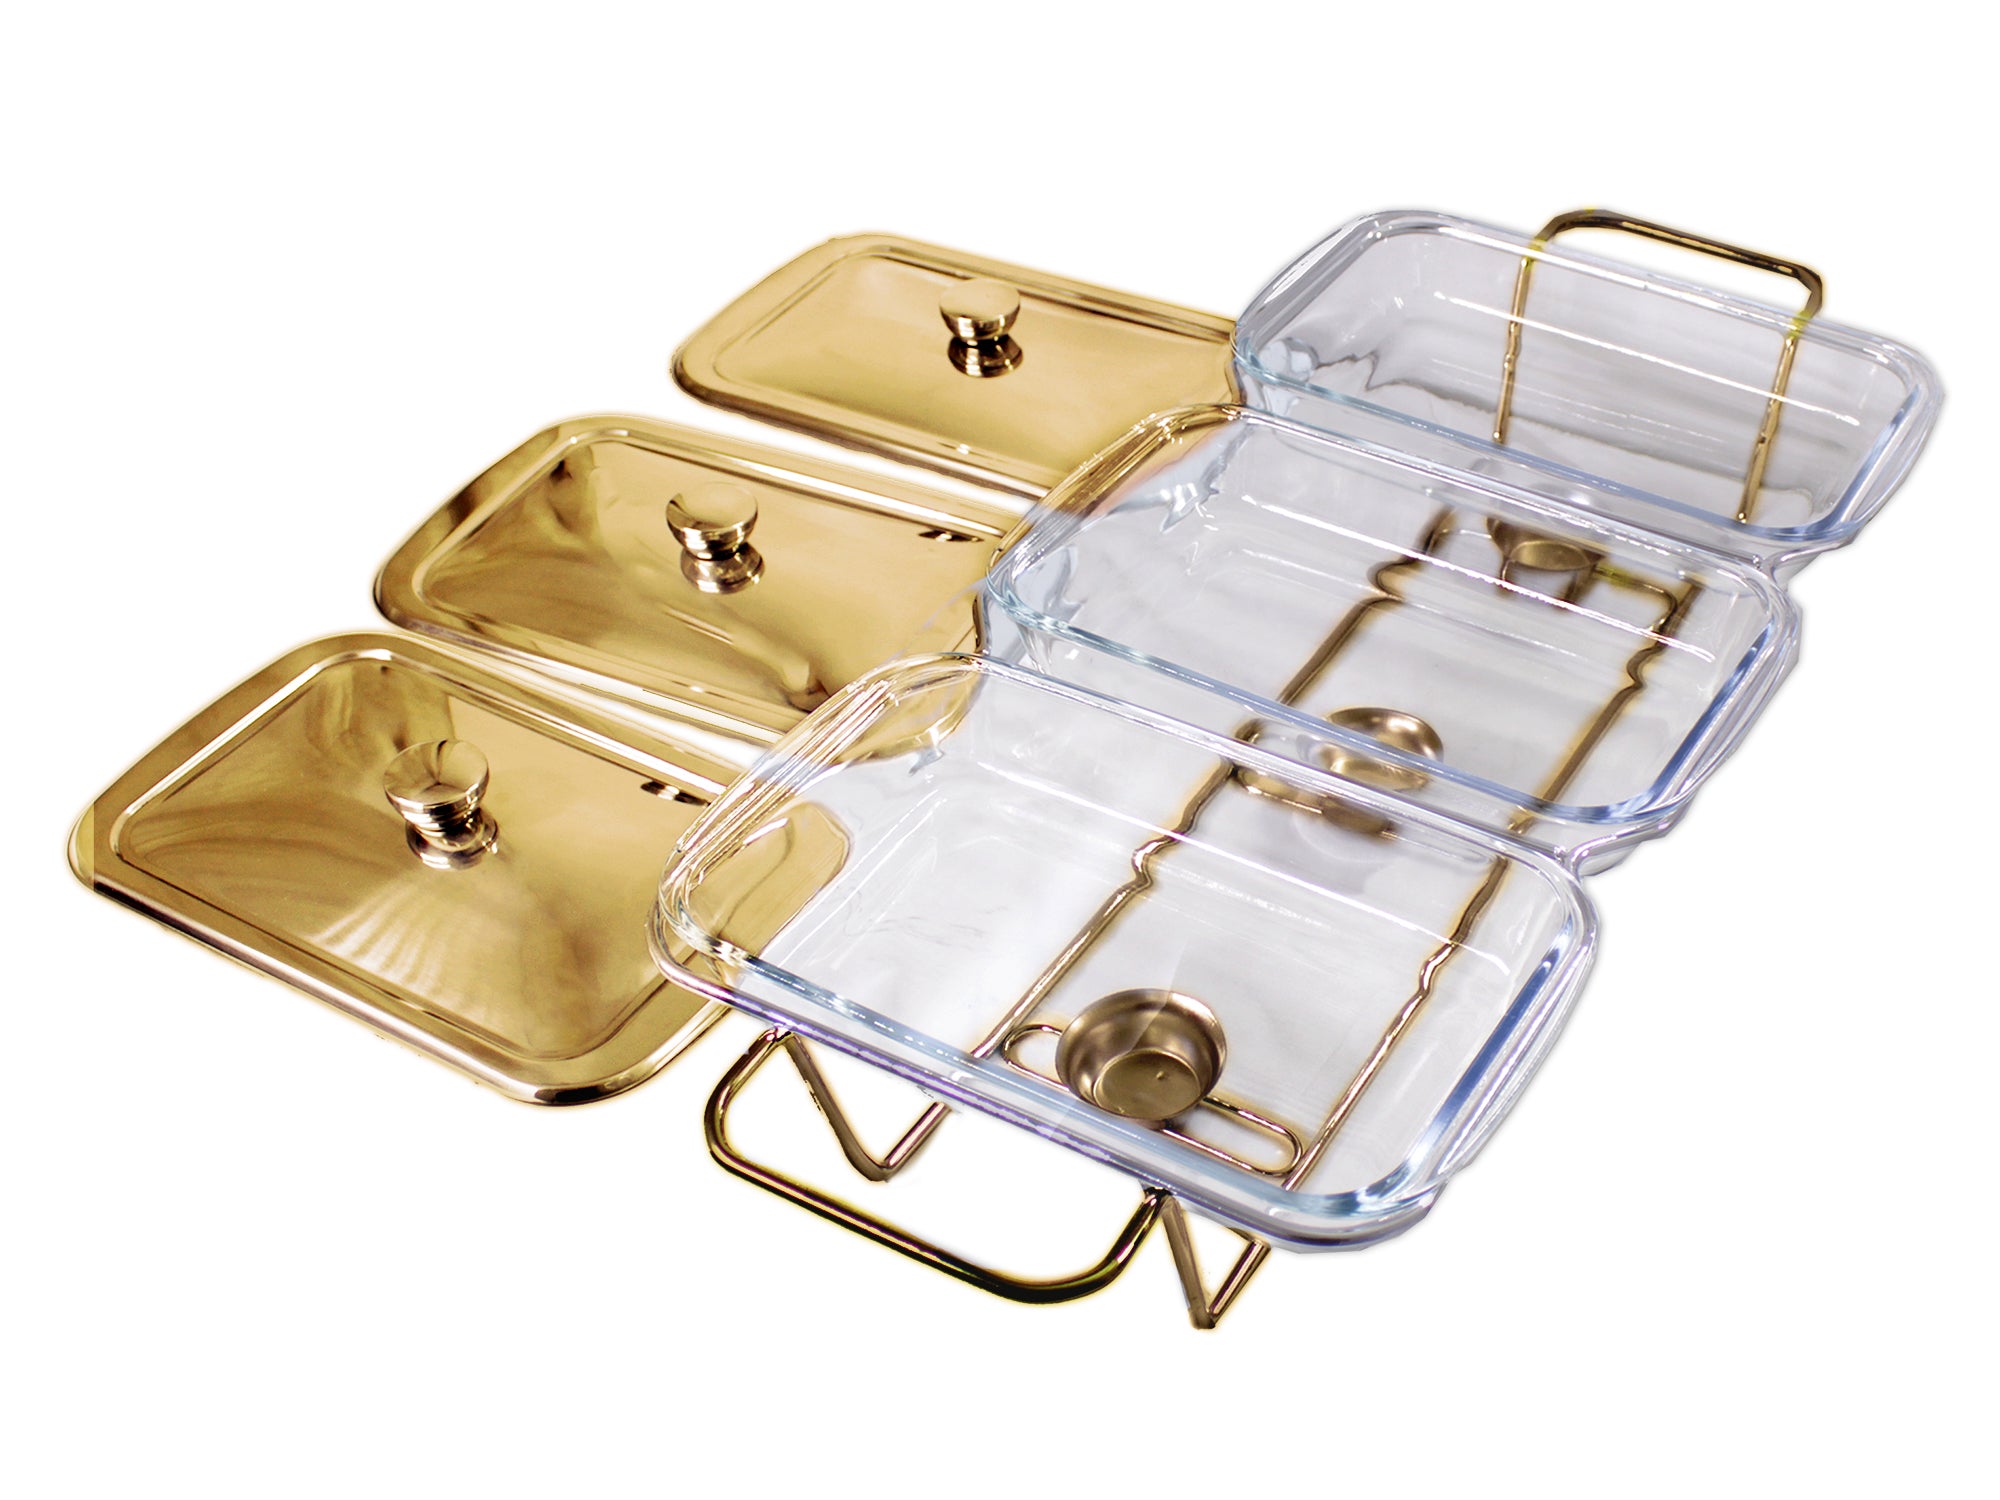 4.5 Liter Triple Pan Glass Chafing Dish with Metal Frame Lids & Silicon Utensils